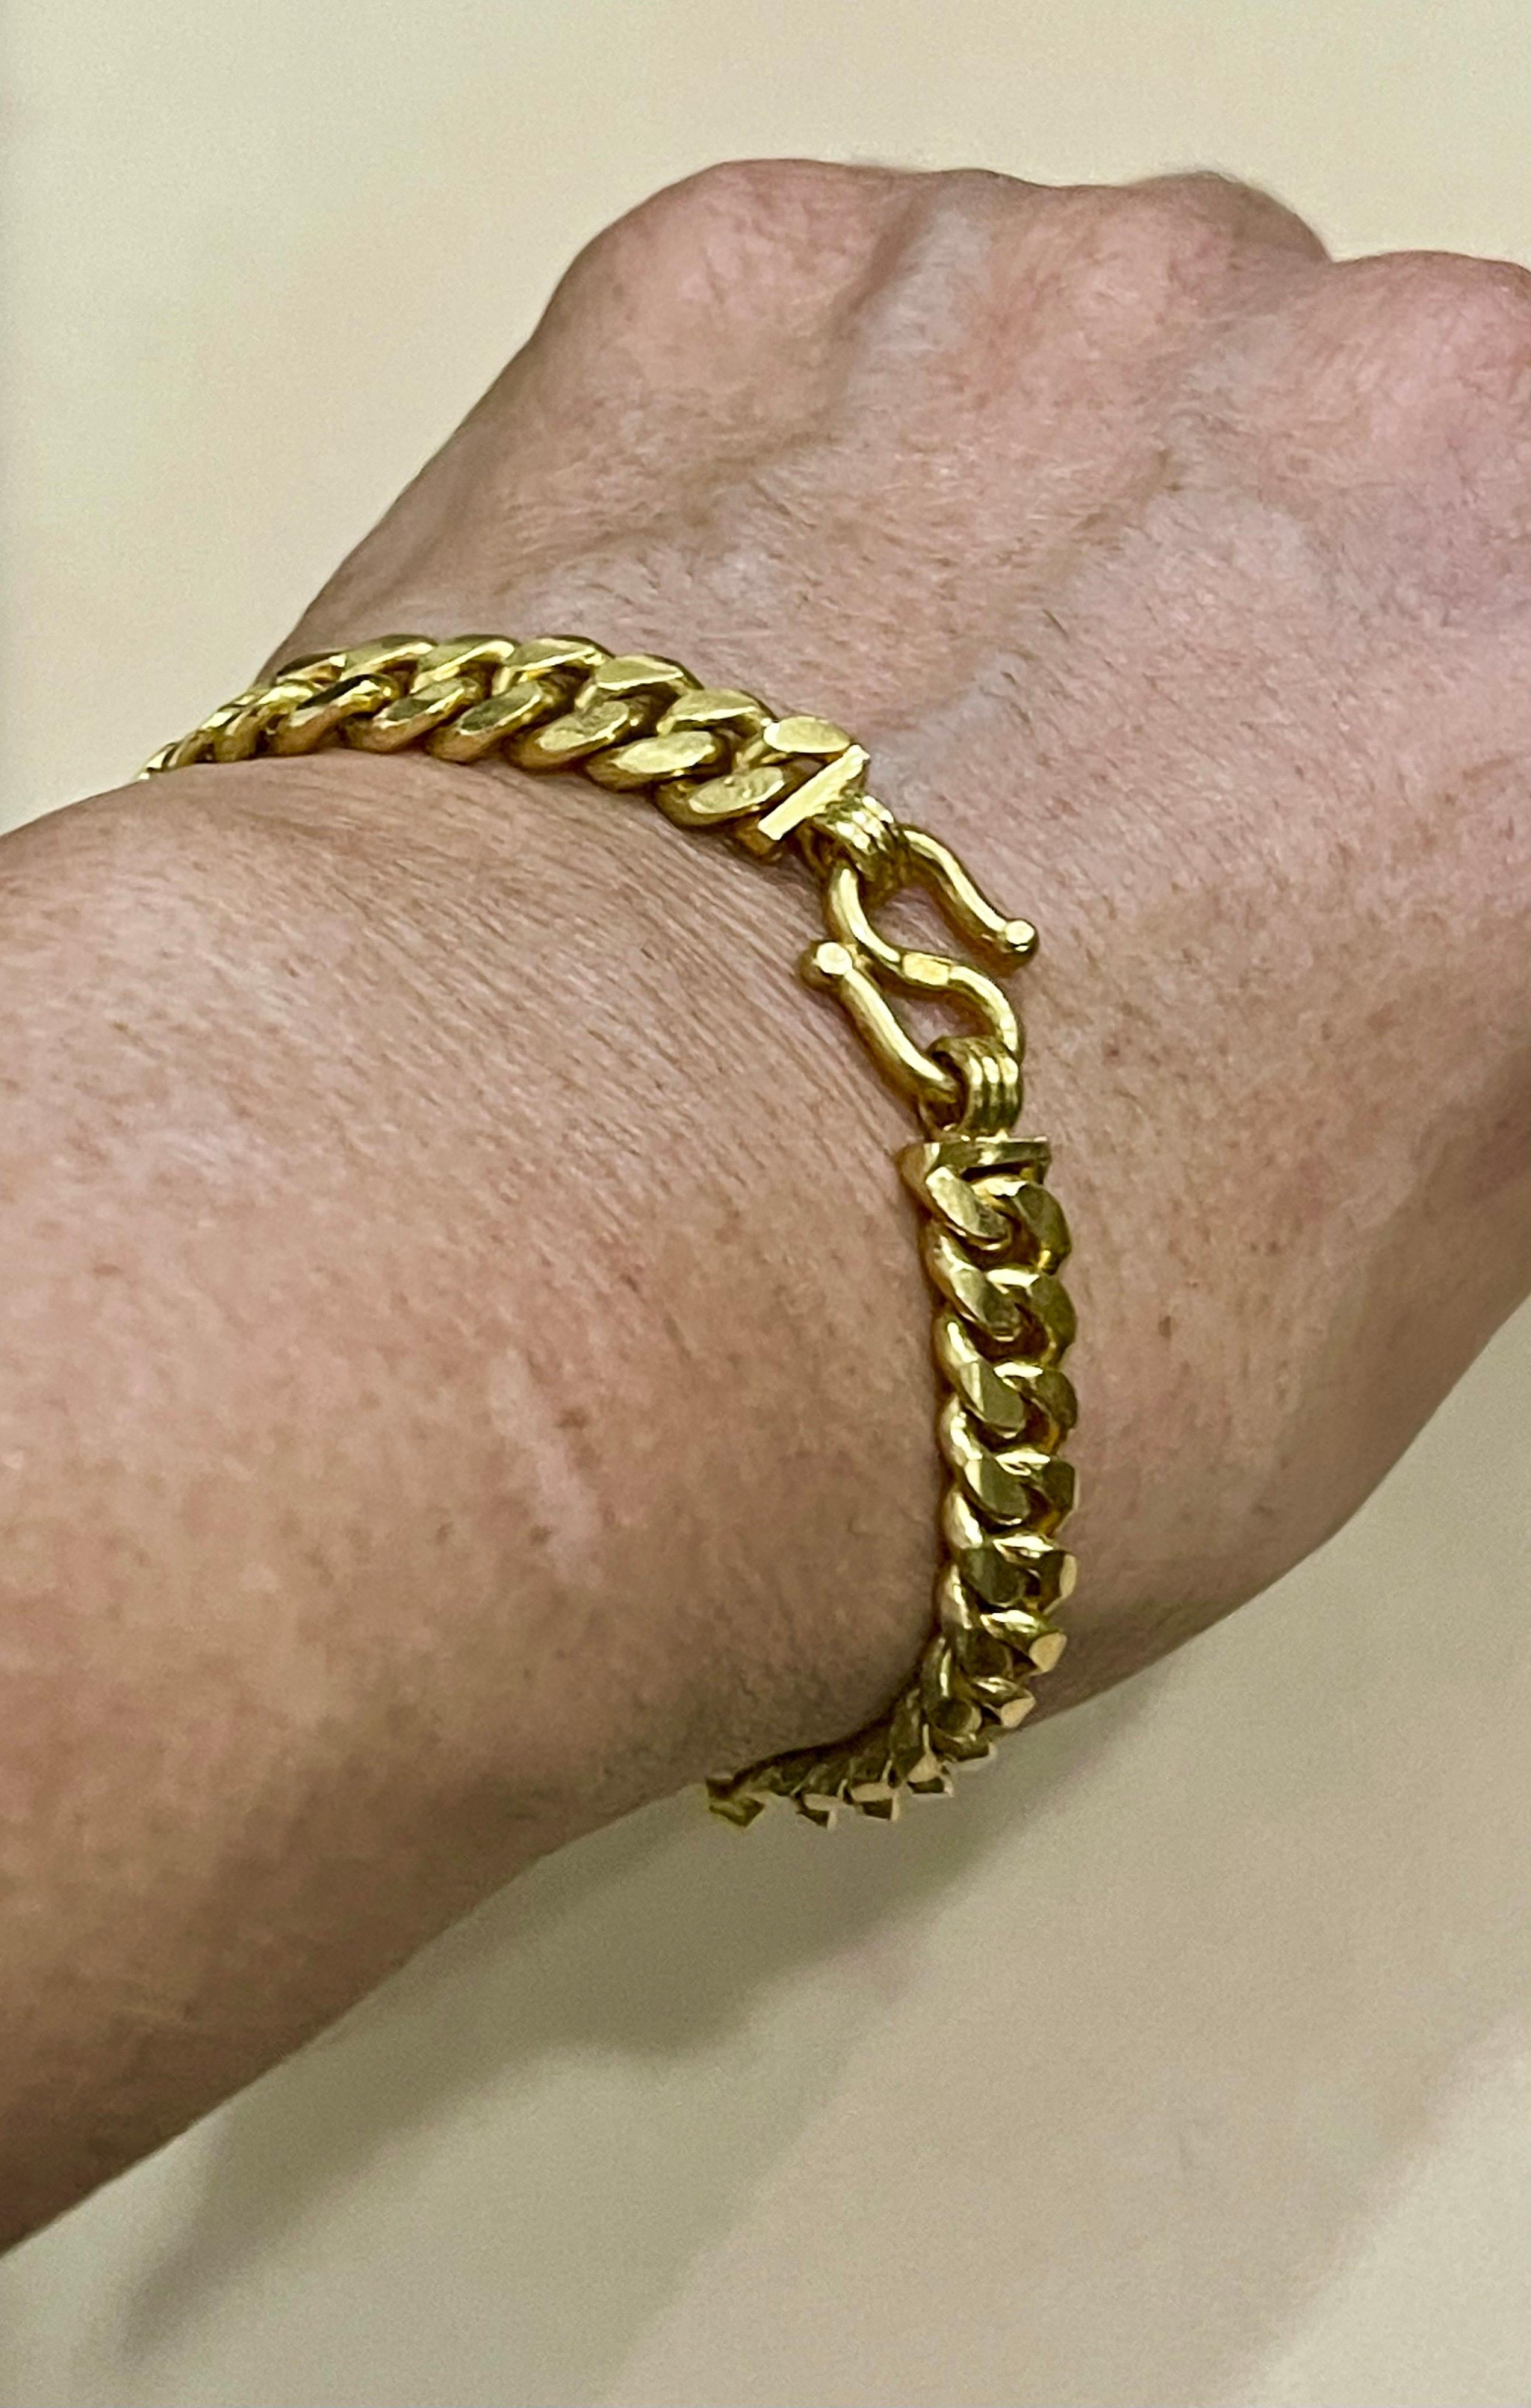 24 Karat  Pure Yellow Gold Link Bracelet, 37.5 Gm, Length 6.5 Inch
6.5 Inches long bracelet
Beautiful link design , A rare pure gold bracelet 
Weight of the bracelet is 37.5  Grams 
Stamped 9999
S shape hook 

Please look at all the pictures
Its